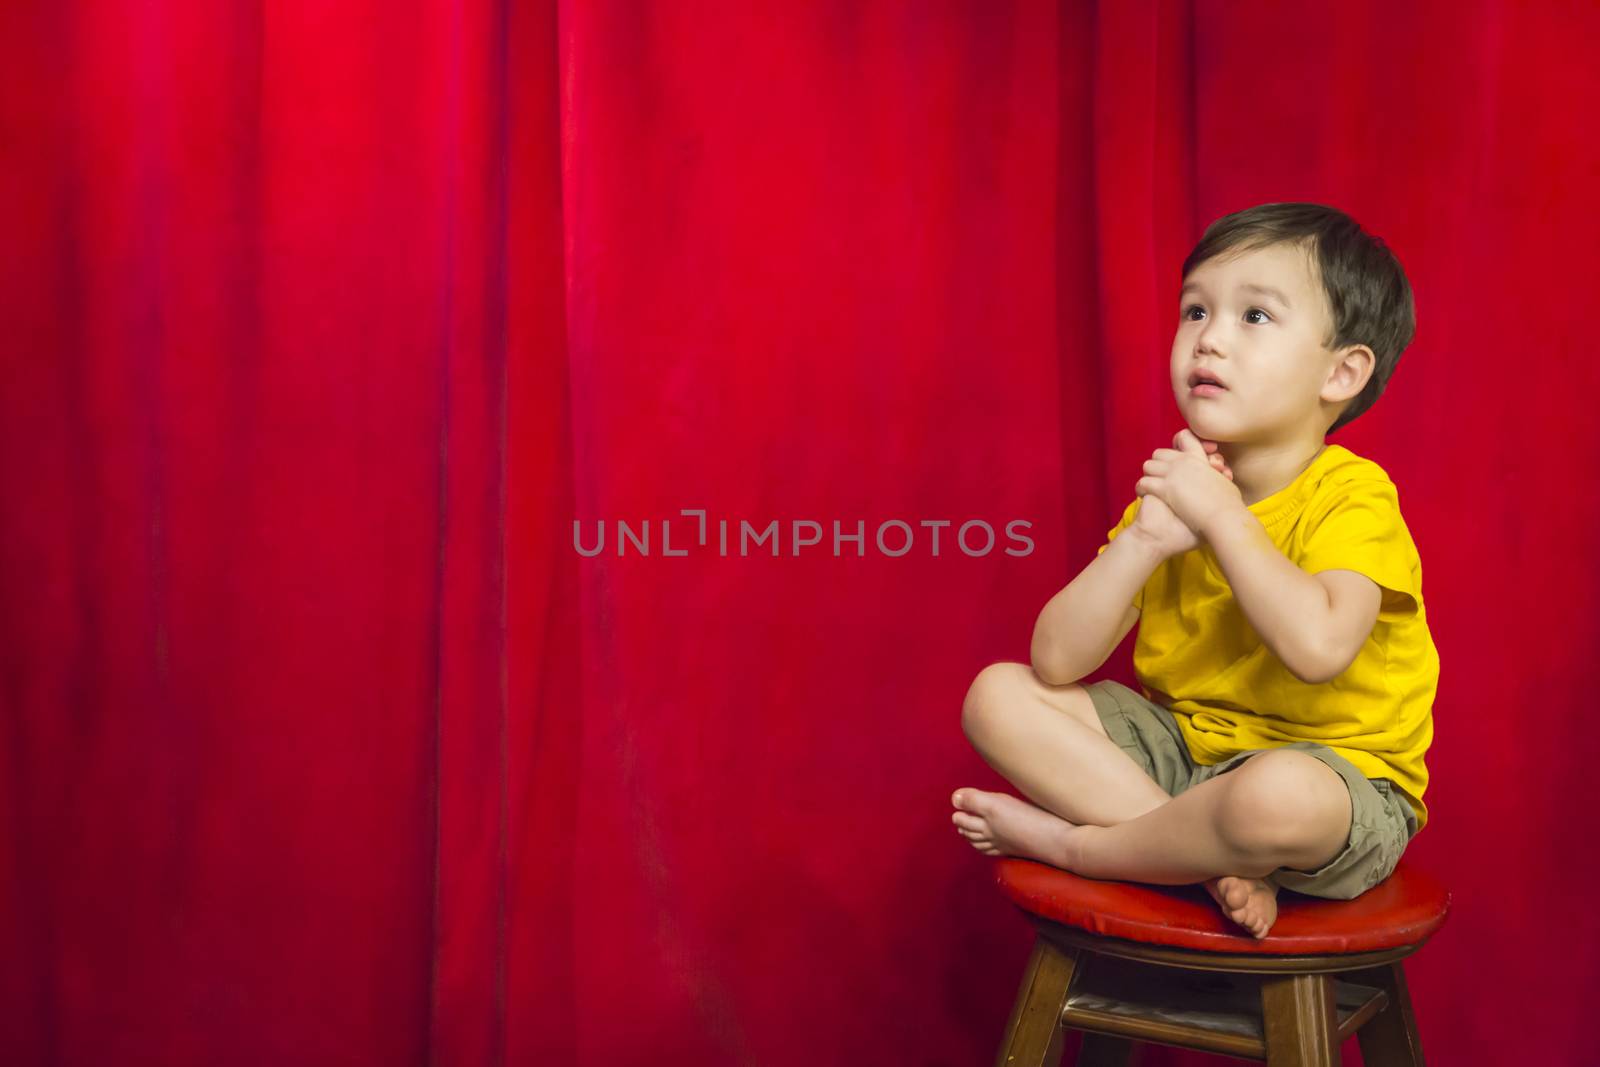 Handsome Mixed Race Boy Sitting on Stool in Front of Red Curtain.